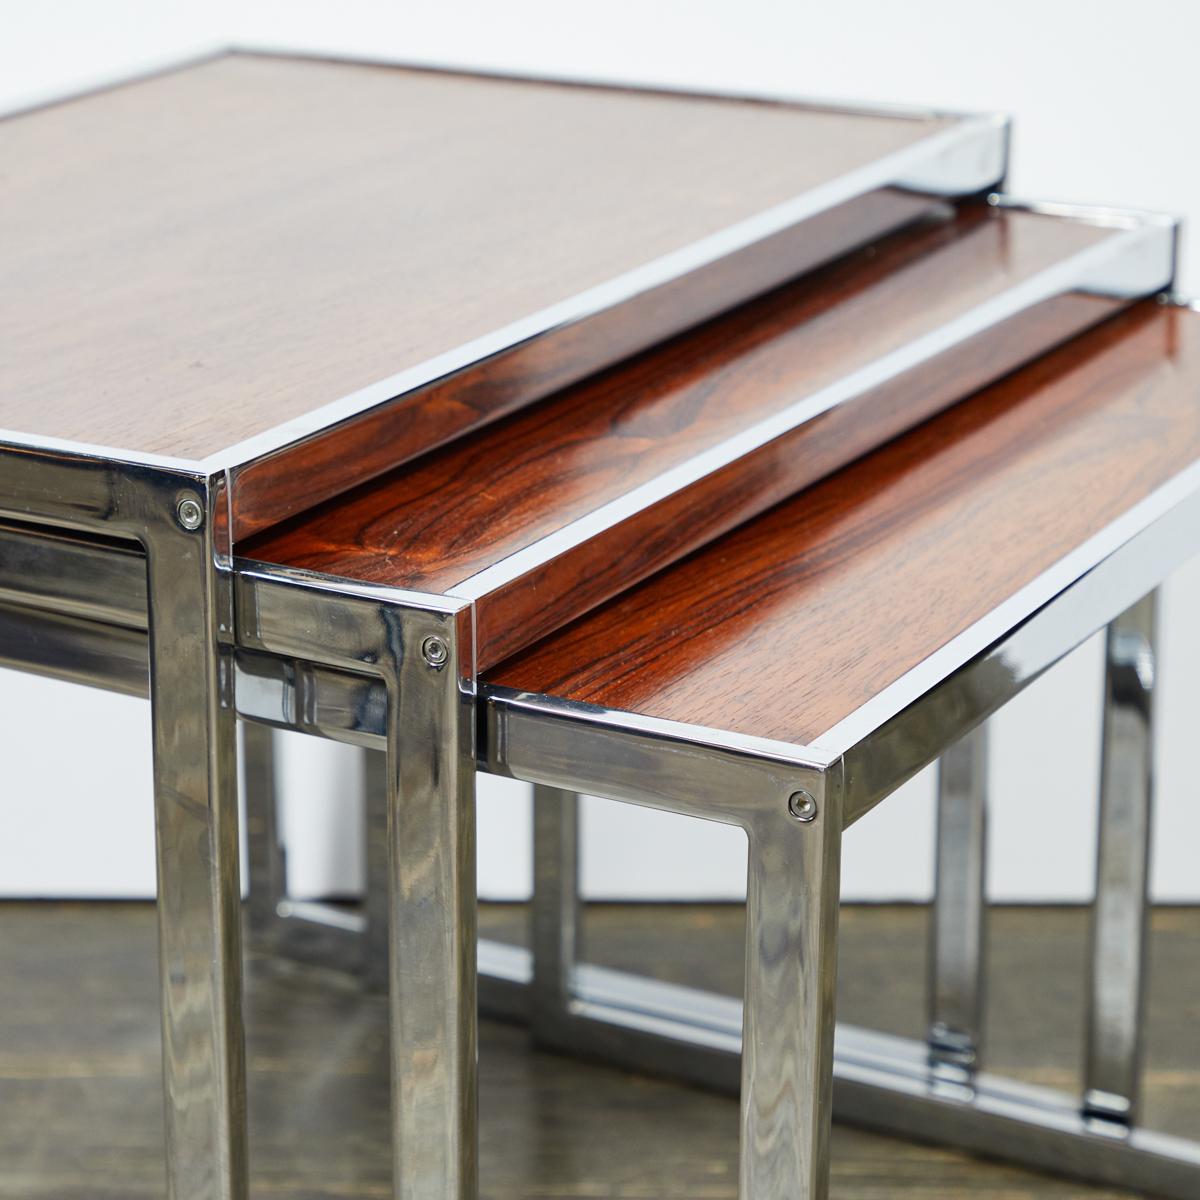 Set of three English mid-century rectangular nesting tables with wood tops and chrome bases. Sexy and versatile, this set adds a touch of subdued glamour to any room.  

England, circa 1960

Dimensions: 25W x 16.5D x 19H